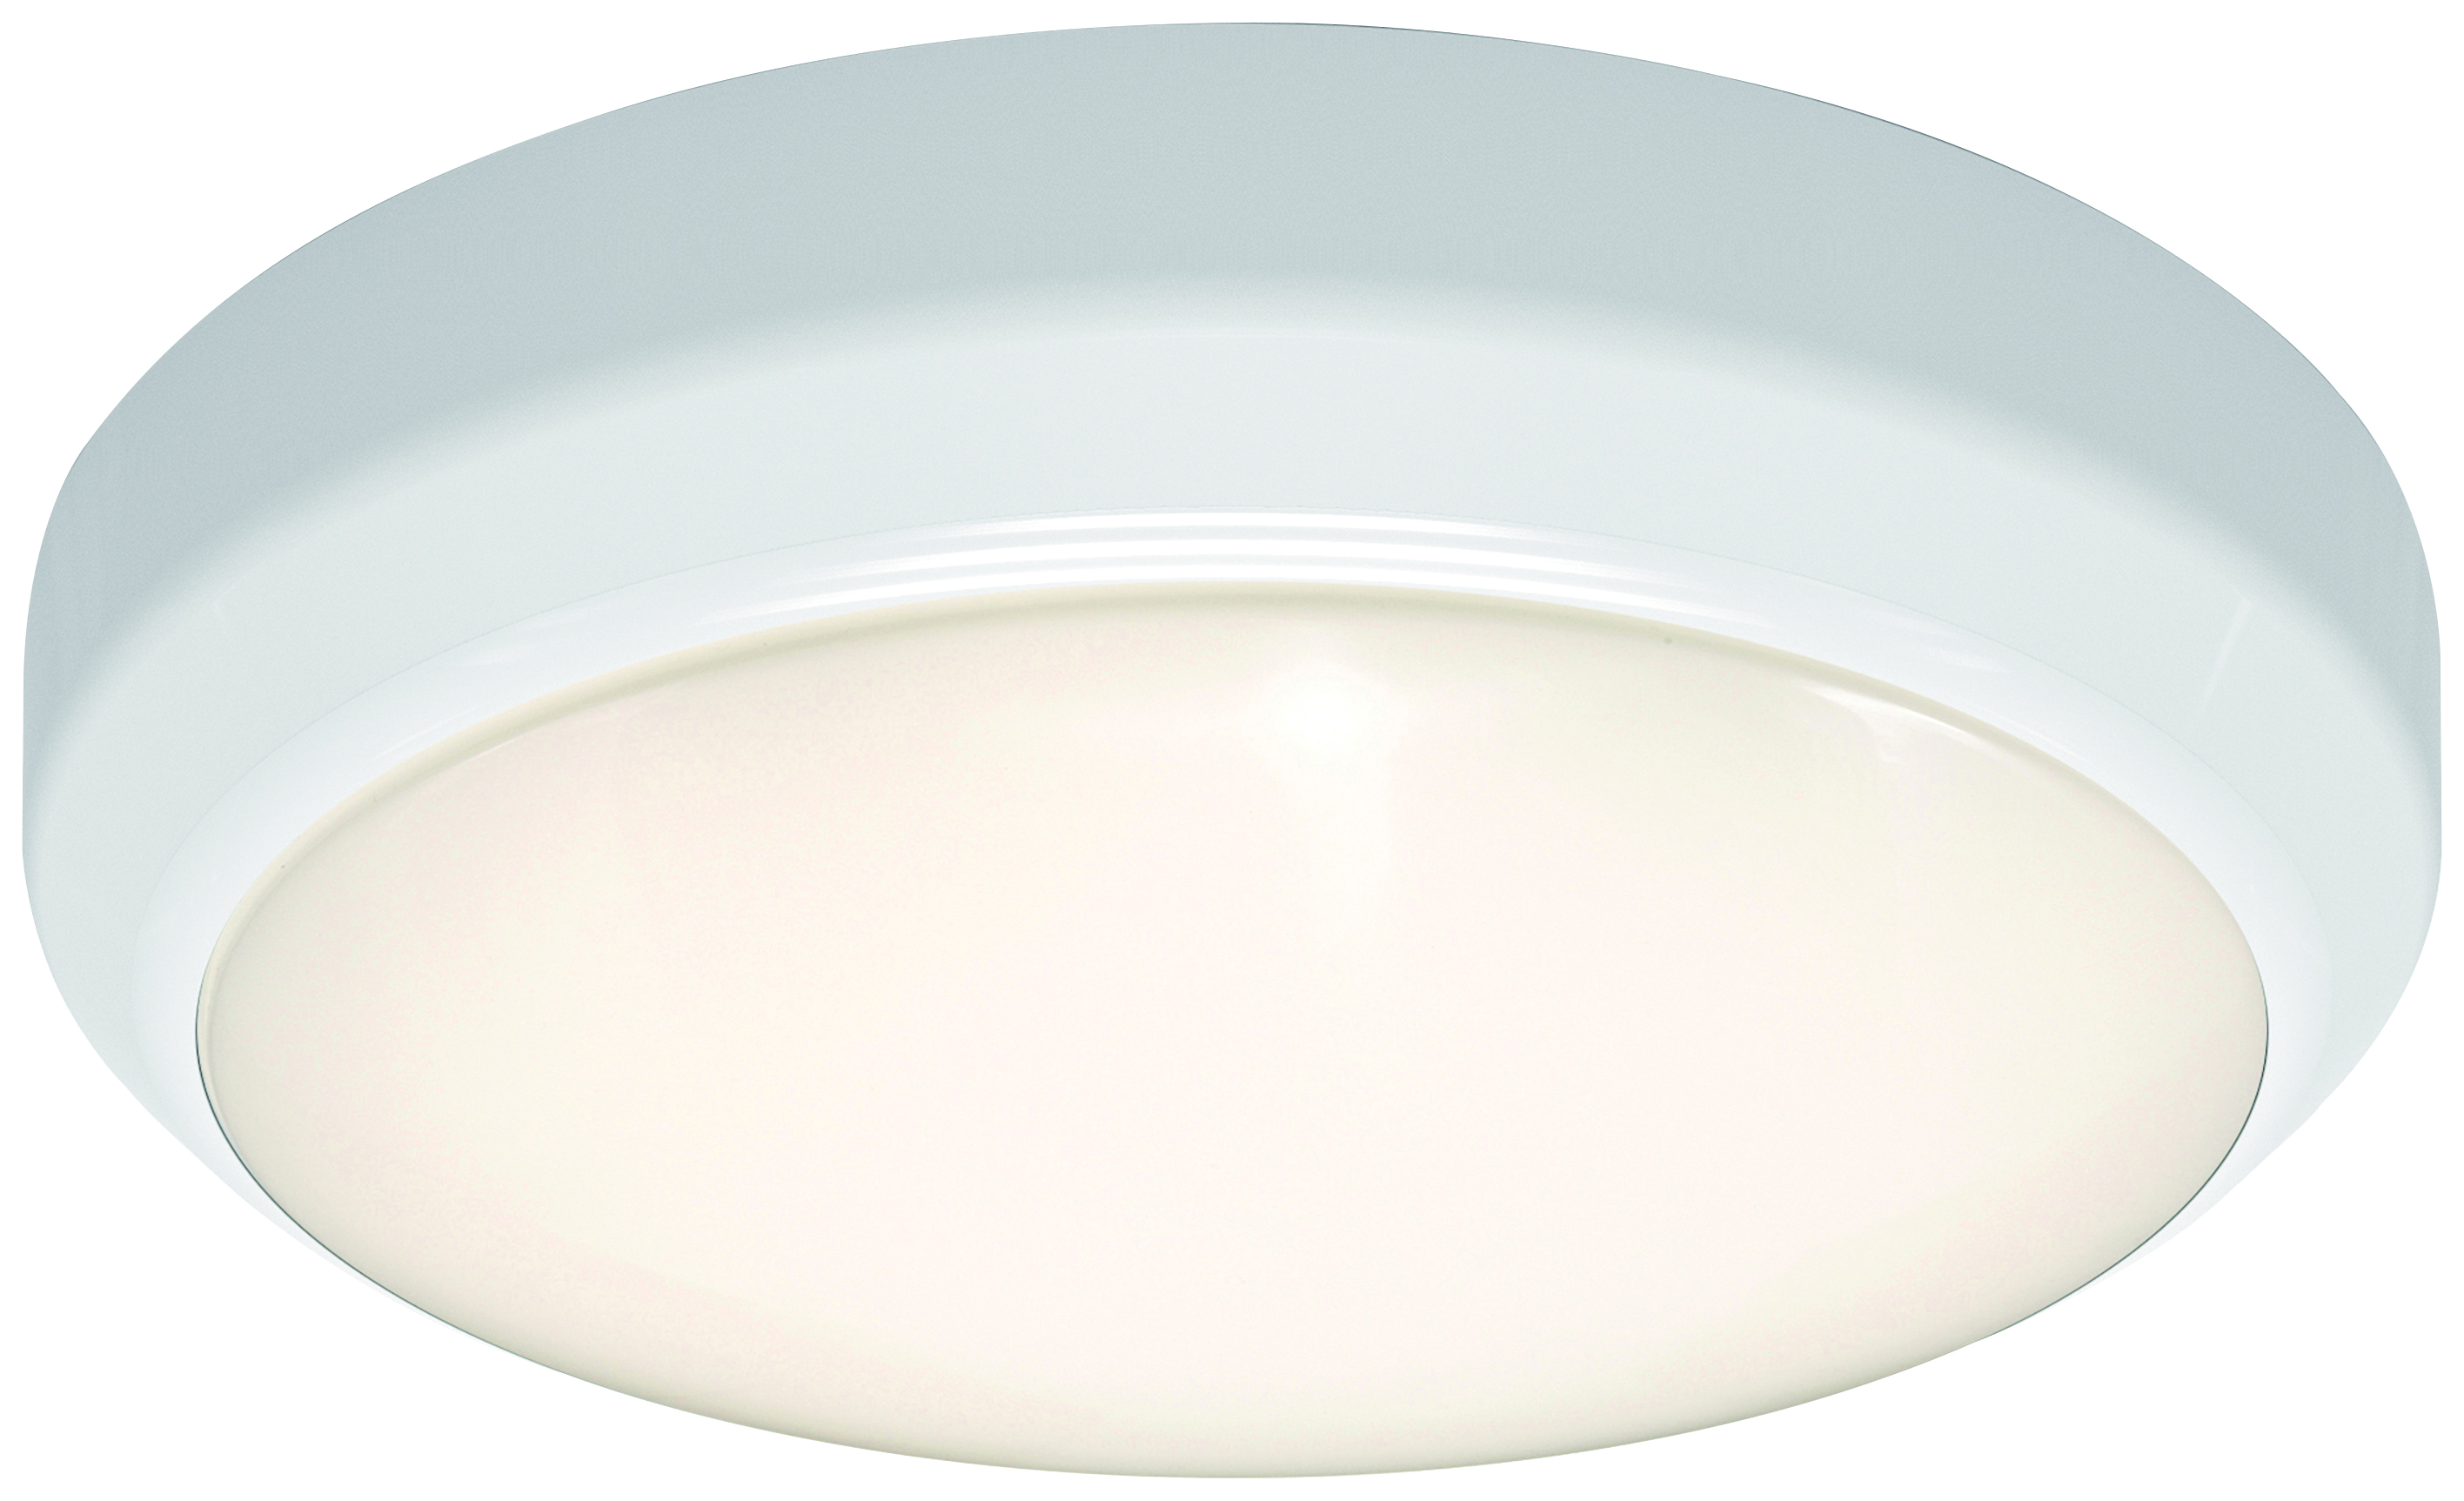 4Lite IP65 LED Surface 13W Wall / Ceiling Light - White